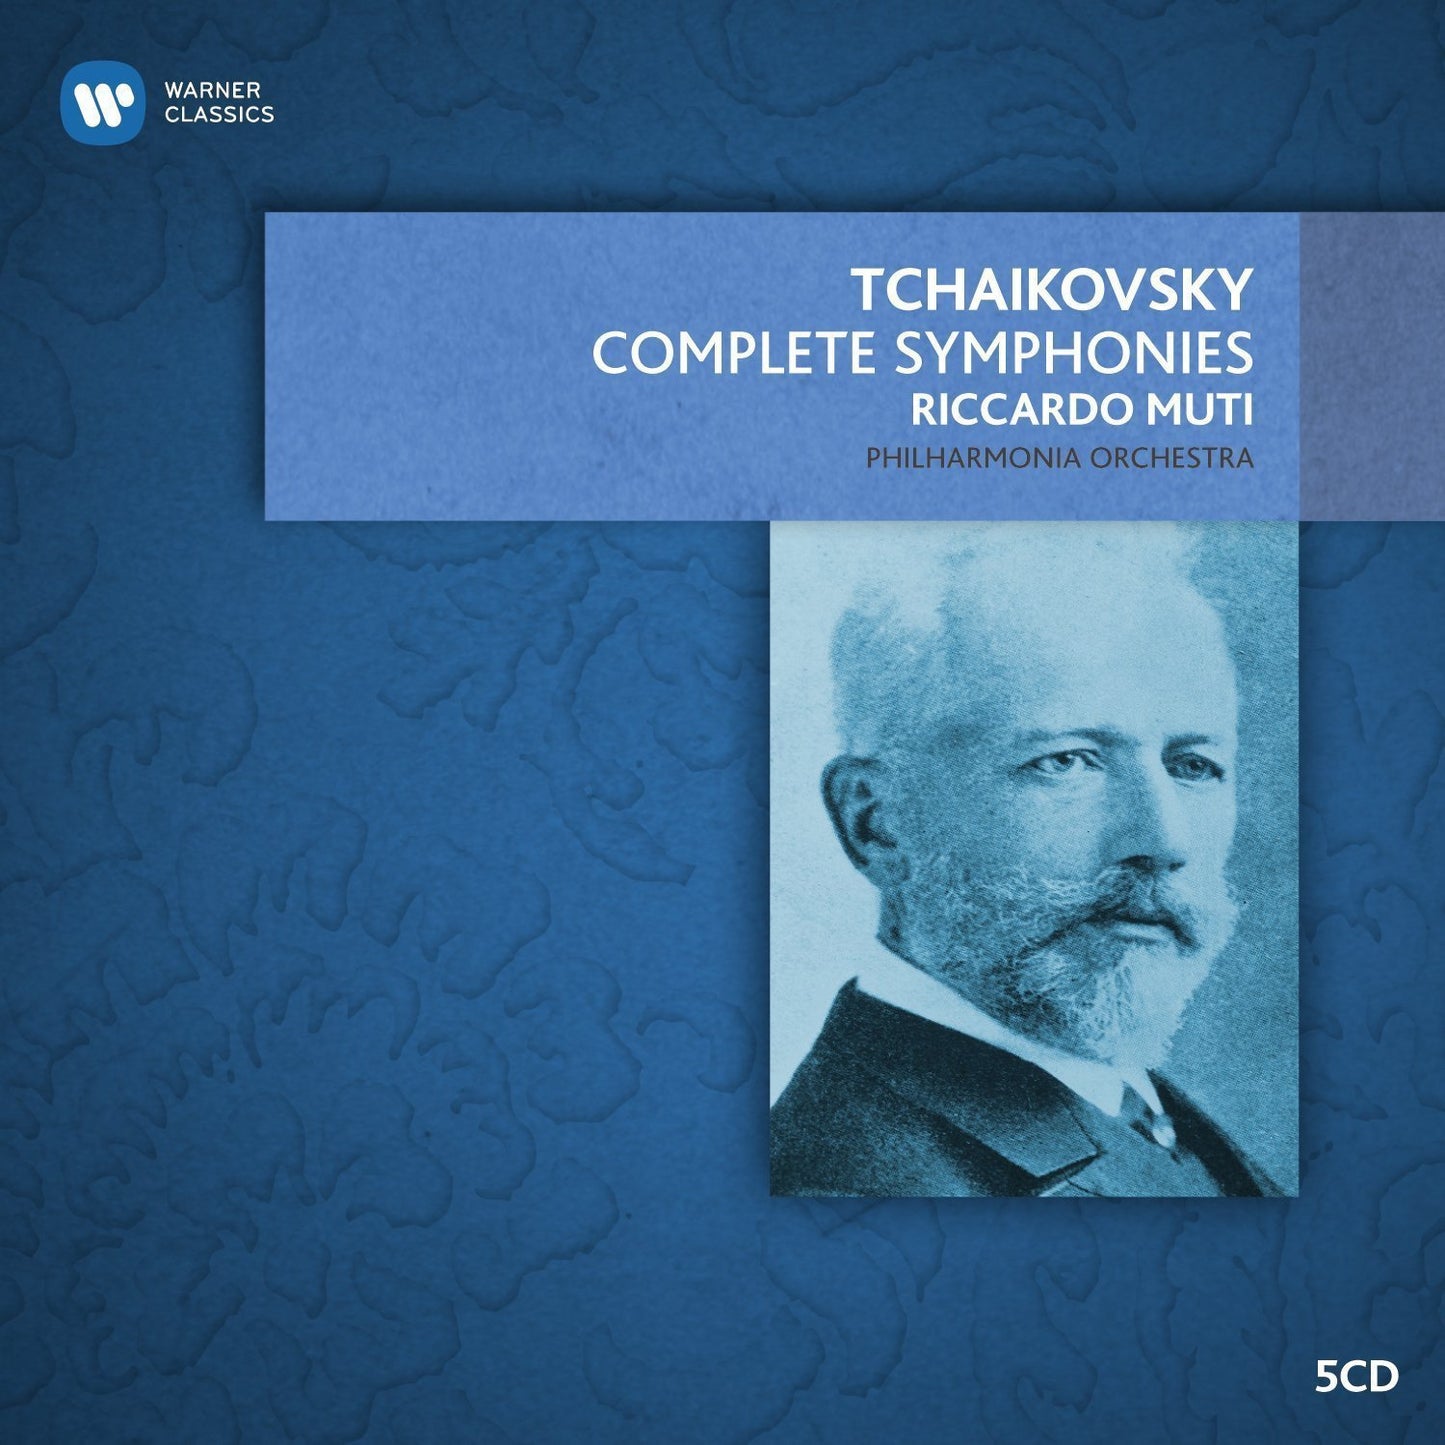 Tchaikovsky: The Complete Symphonies, Orchestral Works - Riccardo Muti (5 CDs)